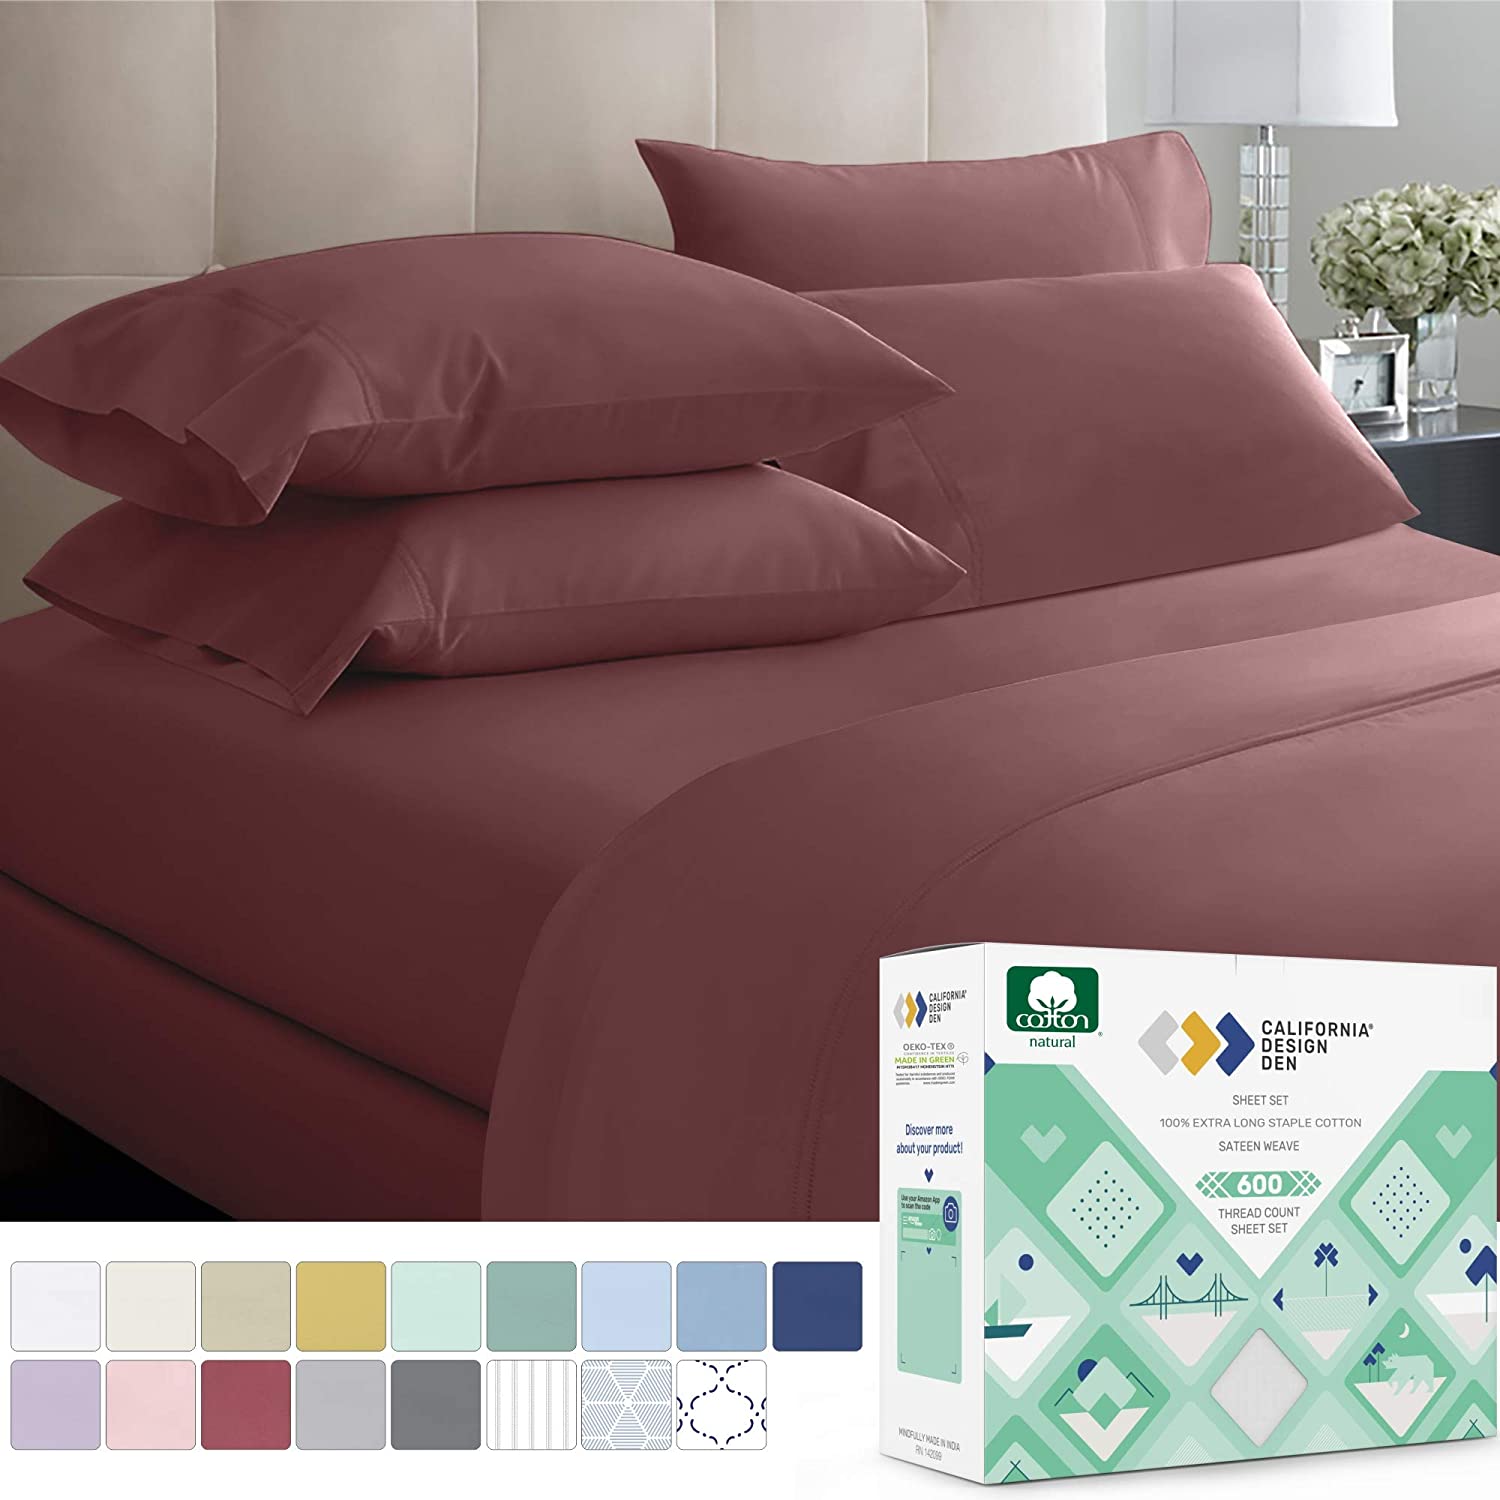 Luxury Queen Sheets 600 Thread Count 100% Extra-Long Staple Cotton Sheet Set 